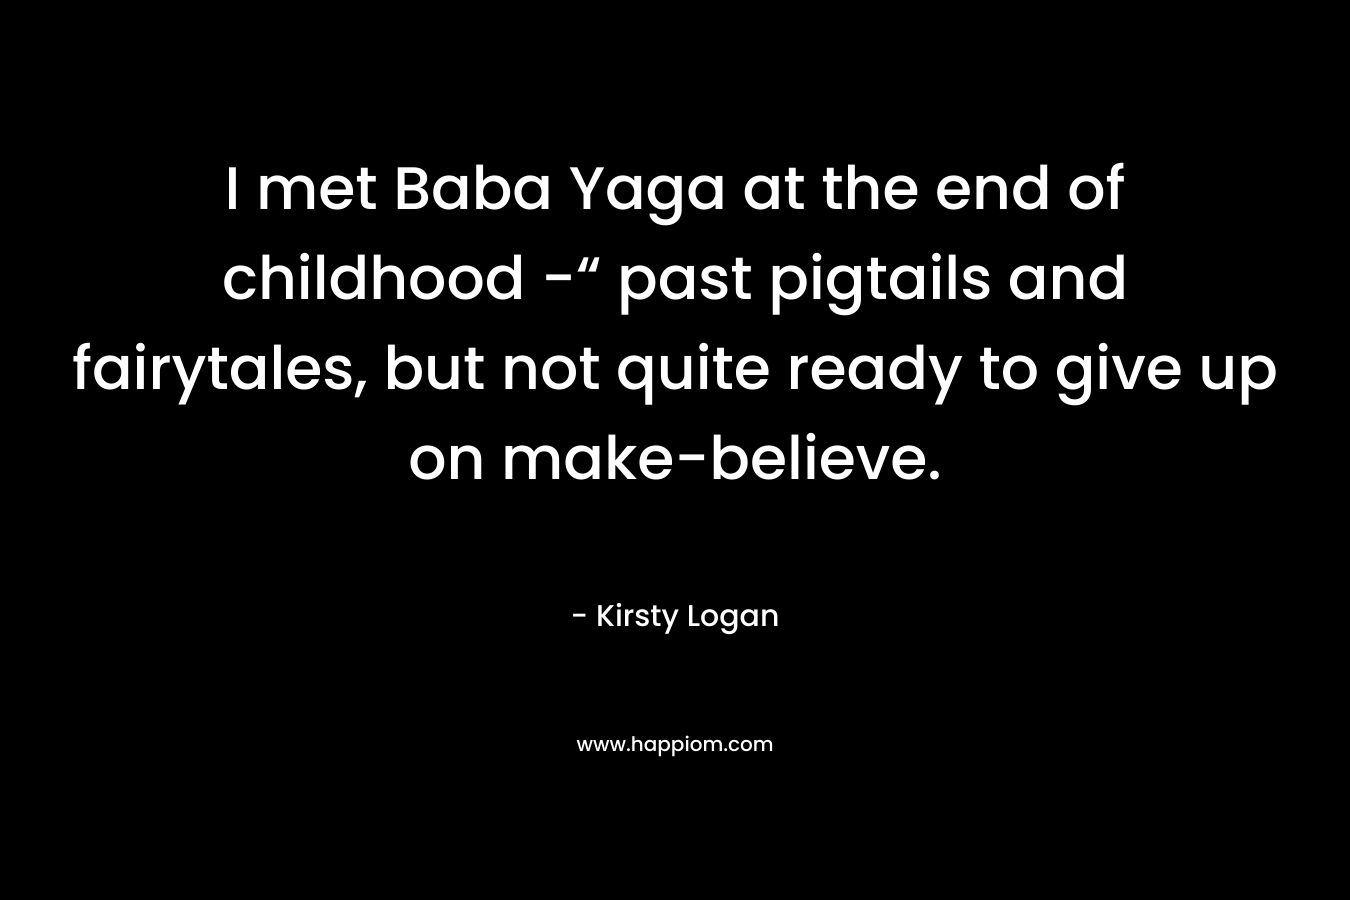 I met Baba Yaga at the end of childhood -“ past pigtails and fairytales, but not quite ready to give up on make-believe.